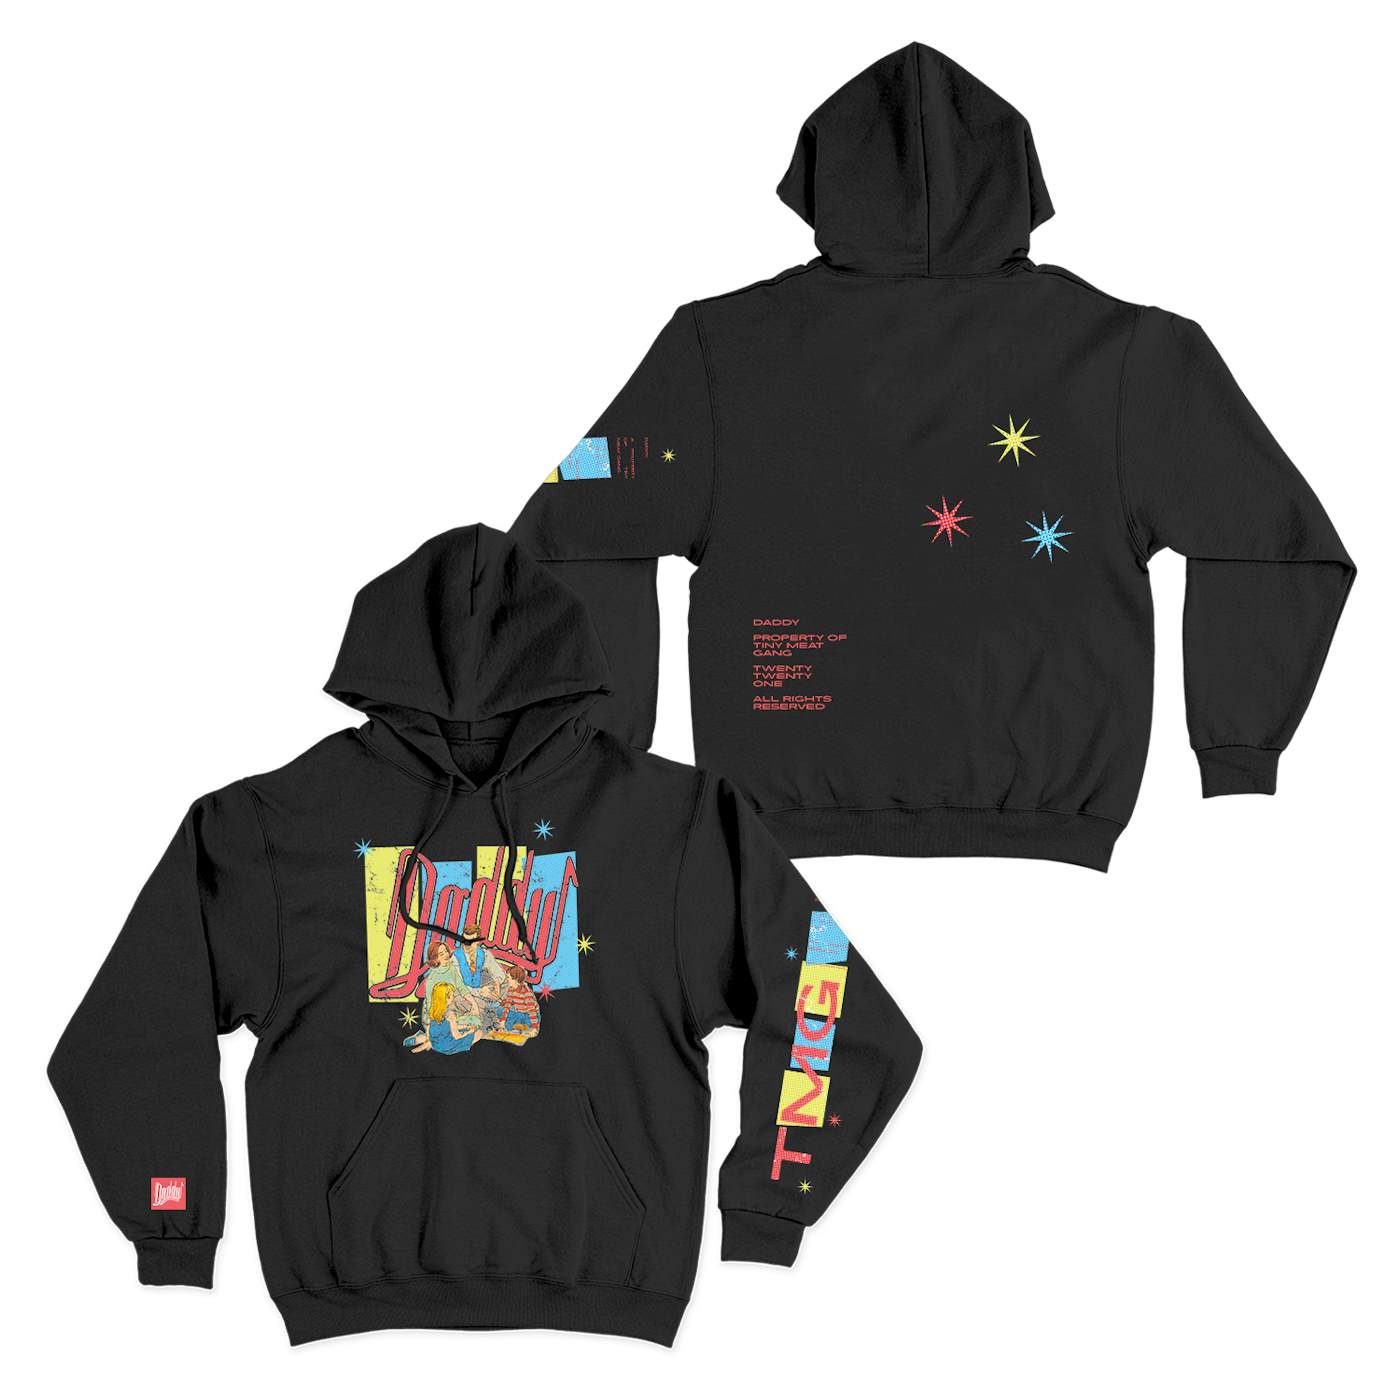 Tiny Meat Gang Family Hoodie